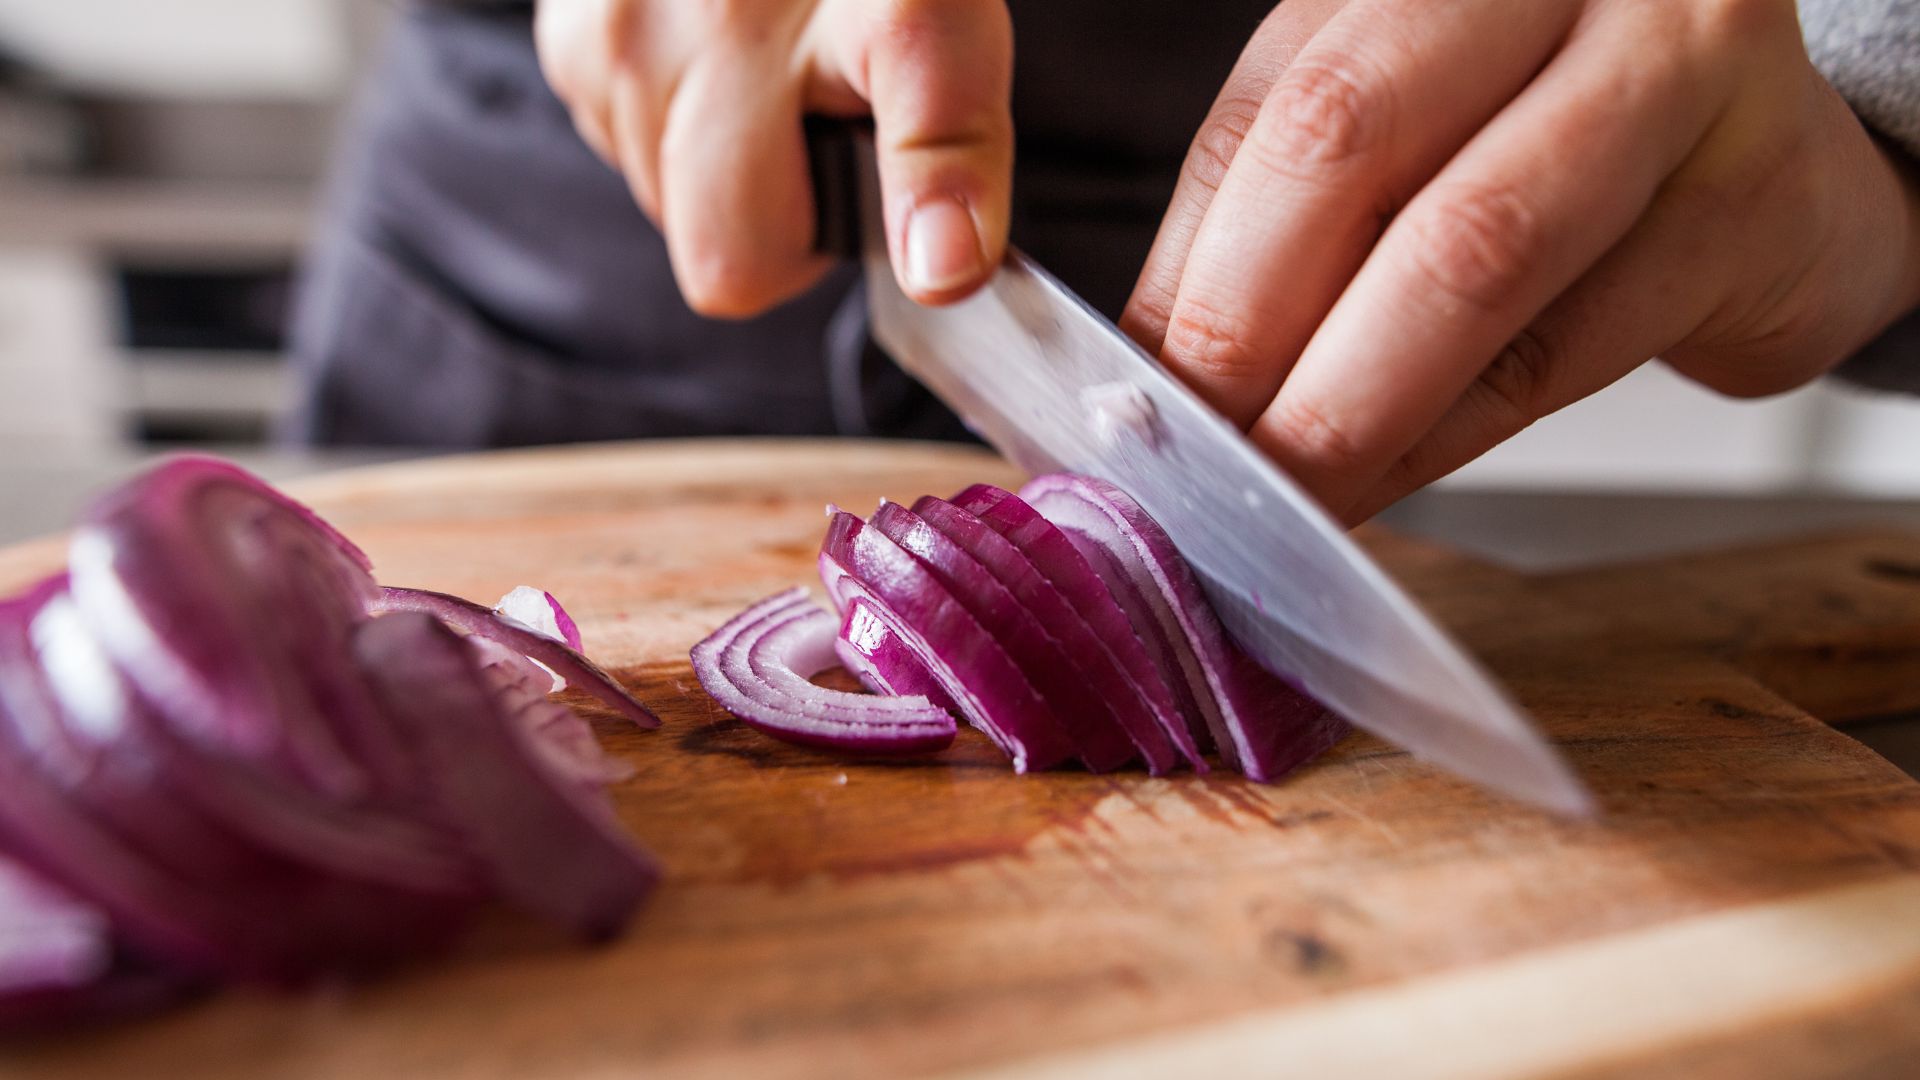 5 foods that cause bloating - onions being cut